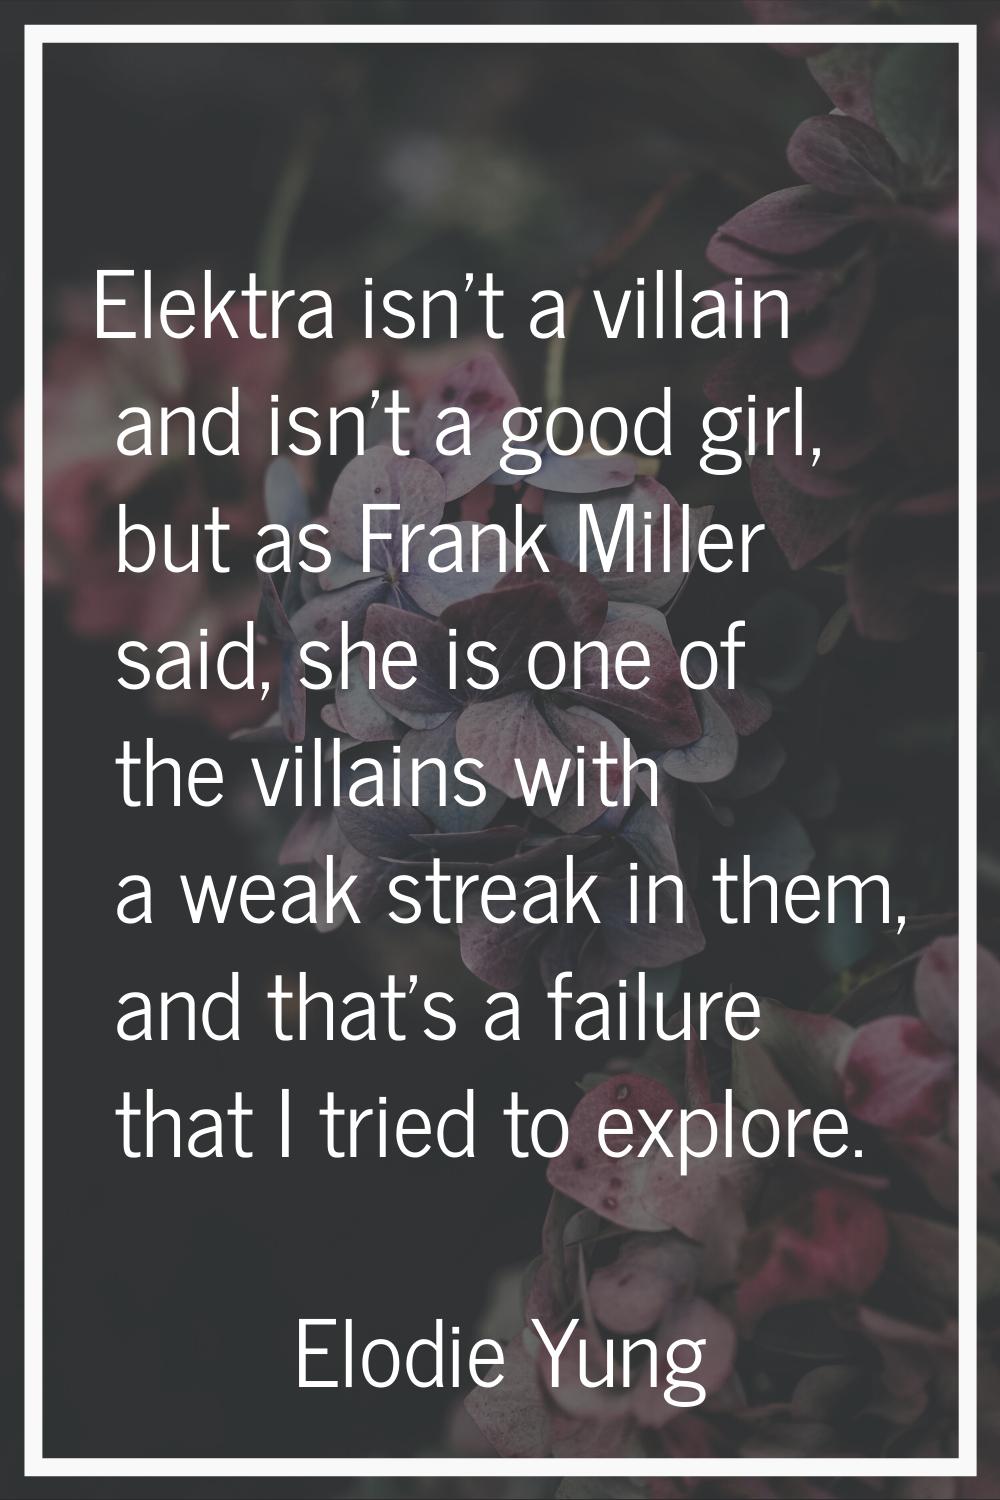 Elektra isn't a villain and isn't a good girl, but as Frank Miller said, she is one of the villains